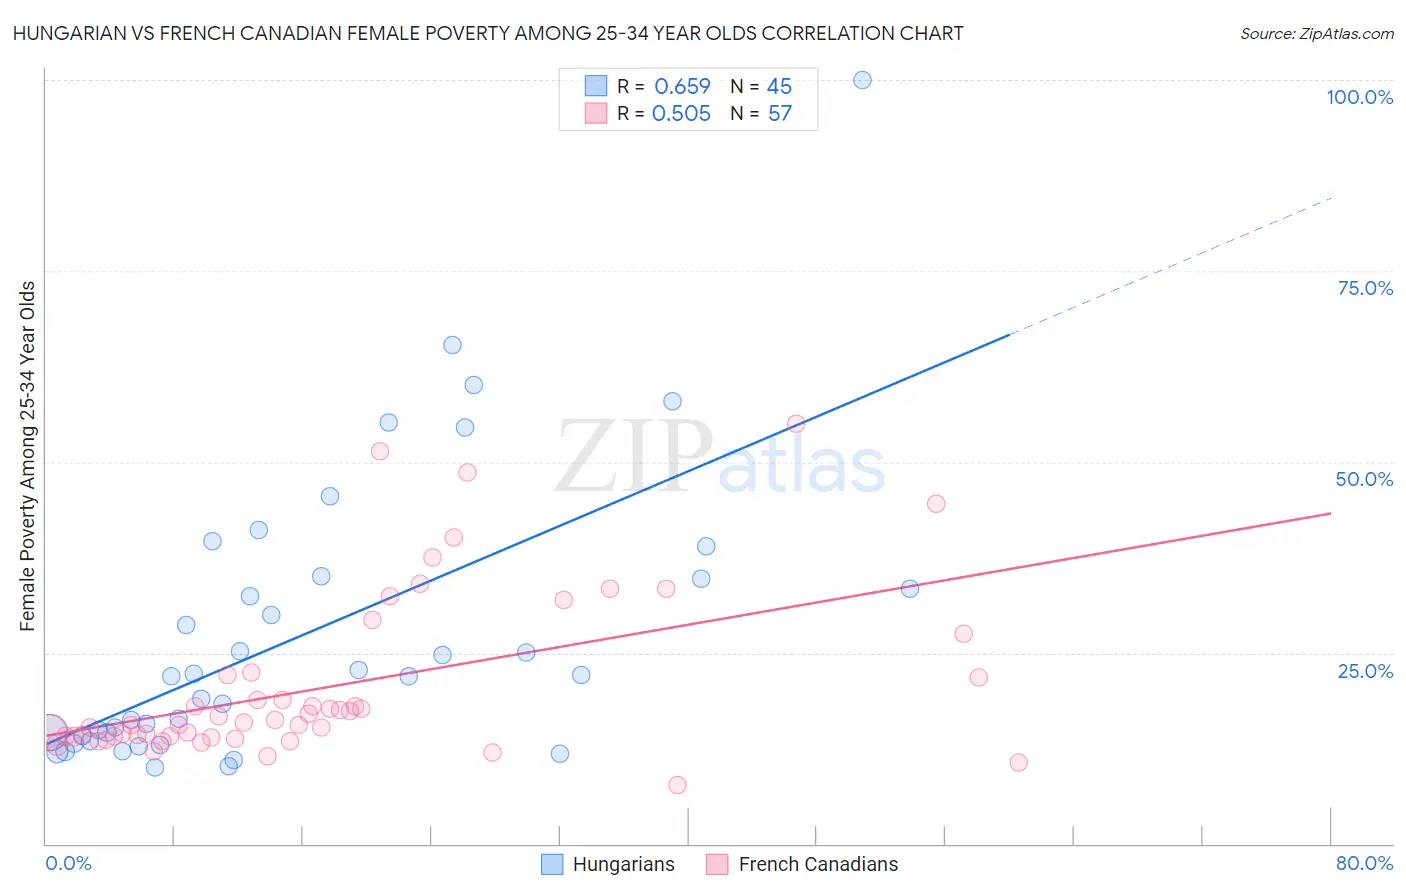 Hungarian vs French Canadian Female Poverty Among 25-34 Year Olds